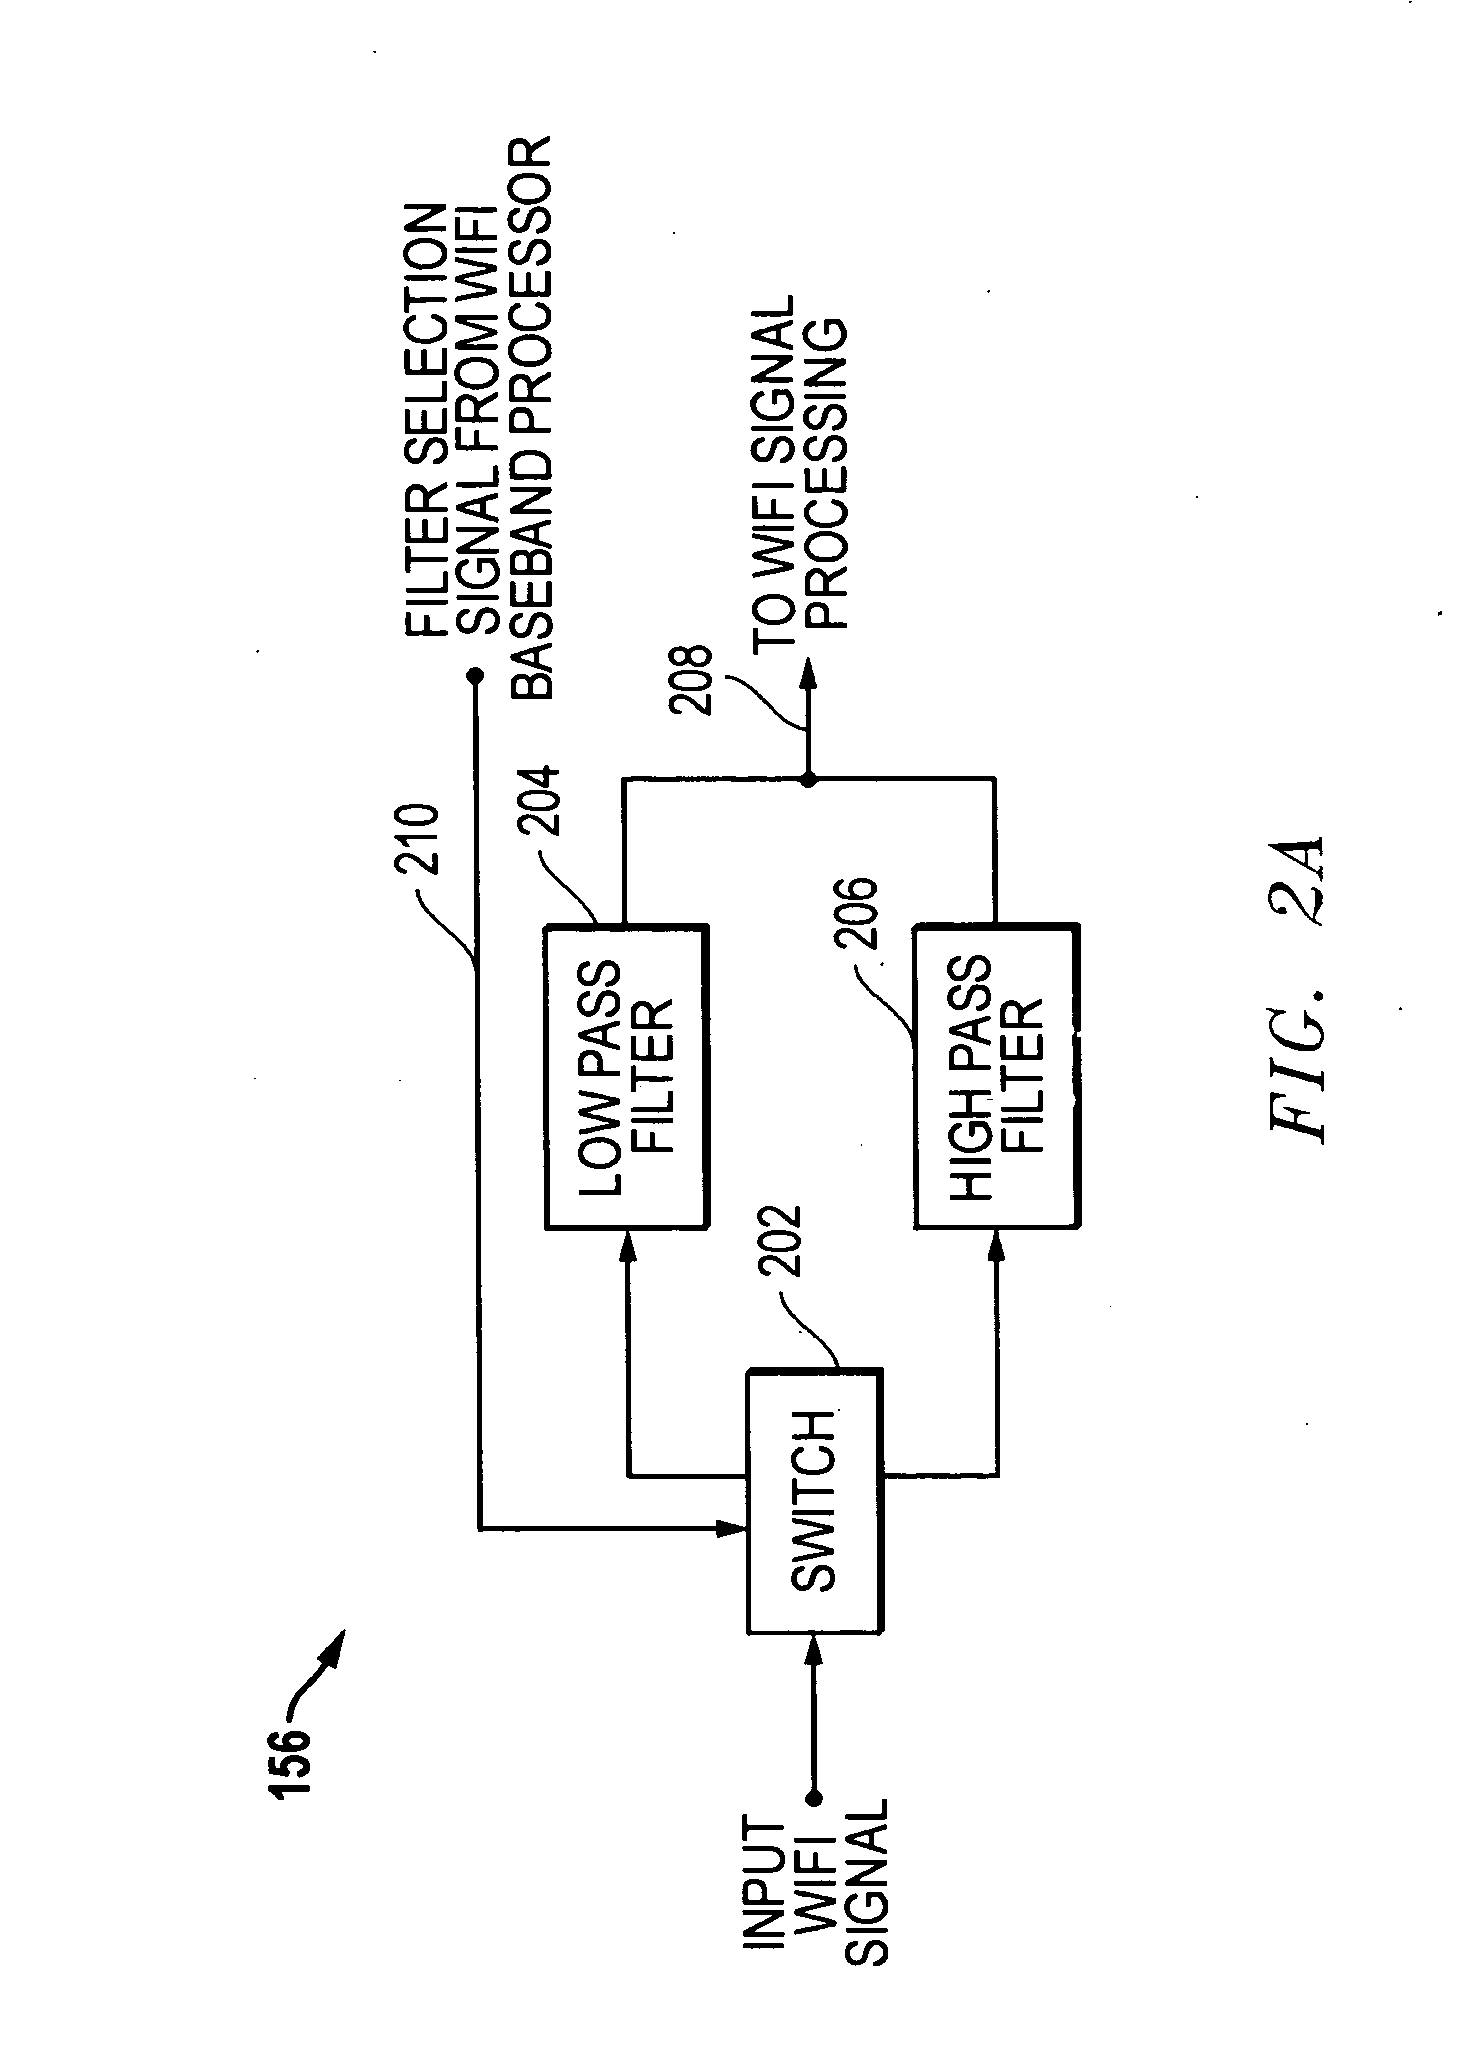 System and method for reducing signal interference between bluetooth and WLAN communications